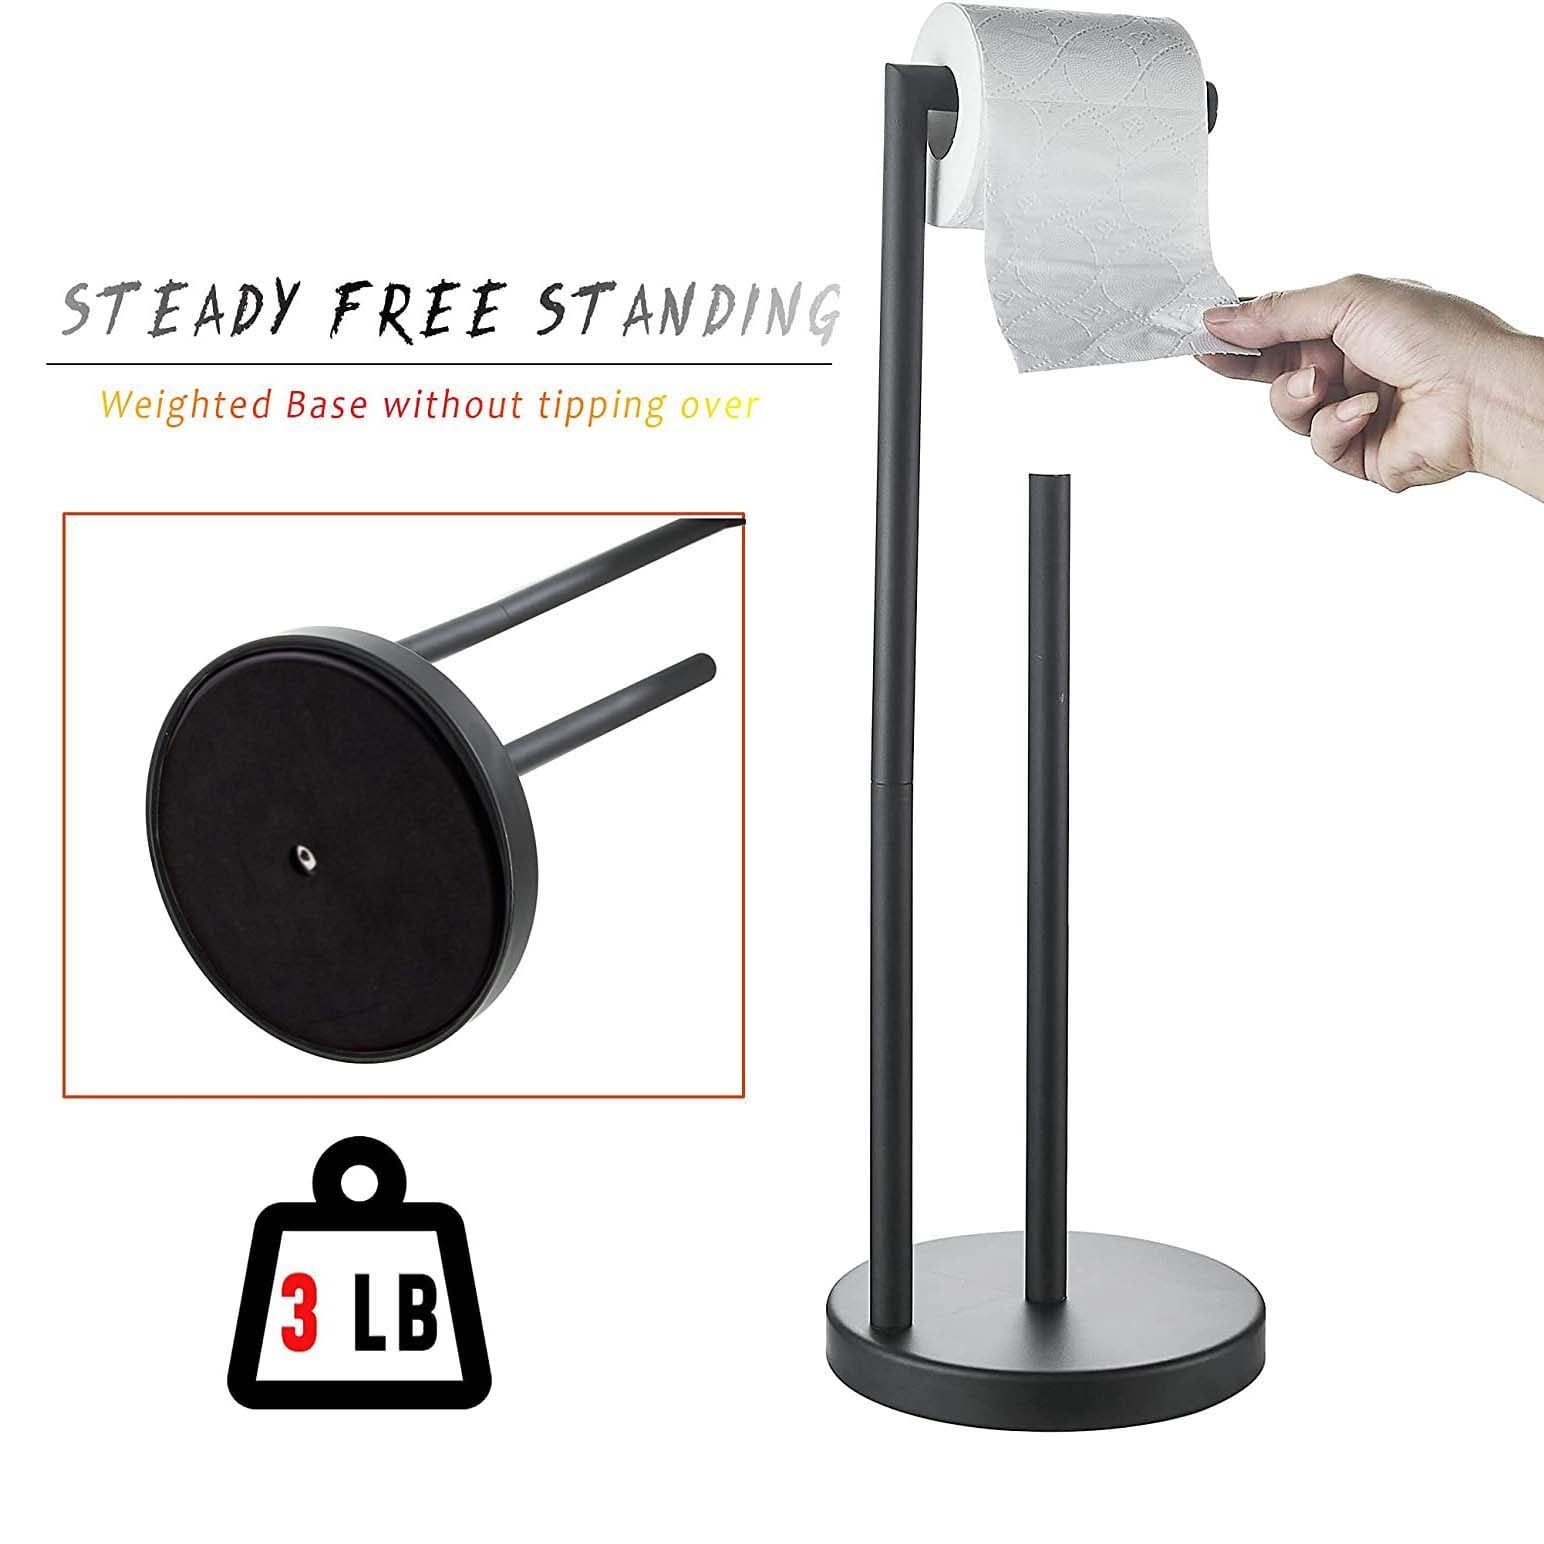 https://ak1.ostkcdn.com/images/products/is/images/direct/18bdd3cb3c03c573399a79658b592a0c7a5dcf40/Freestanding-Toilet-Paper-Holder-Stand-with-Reserver.jpg